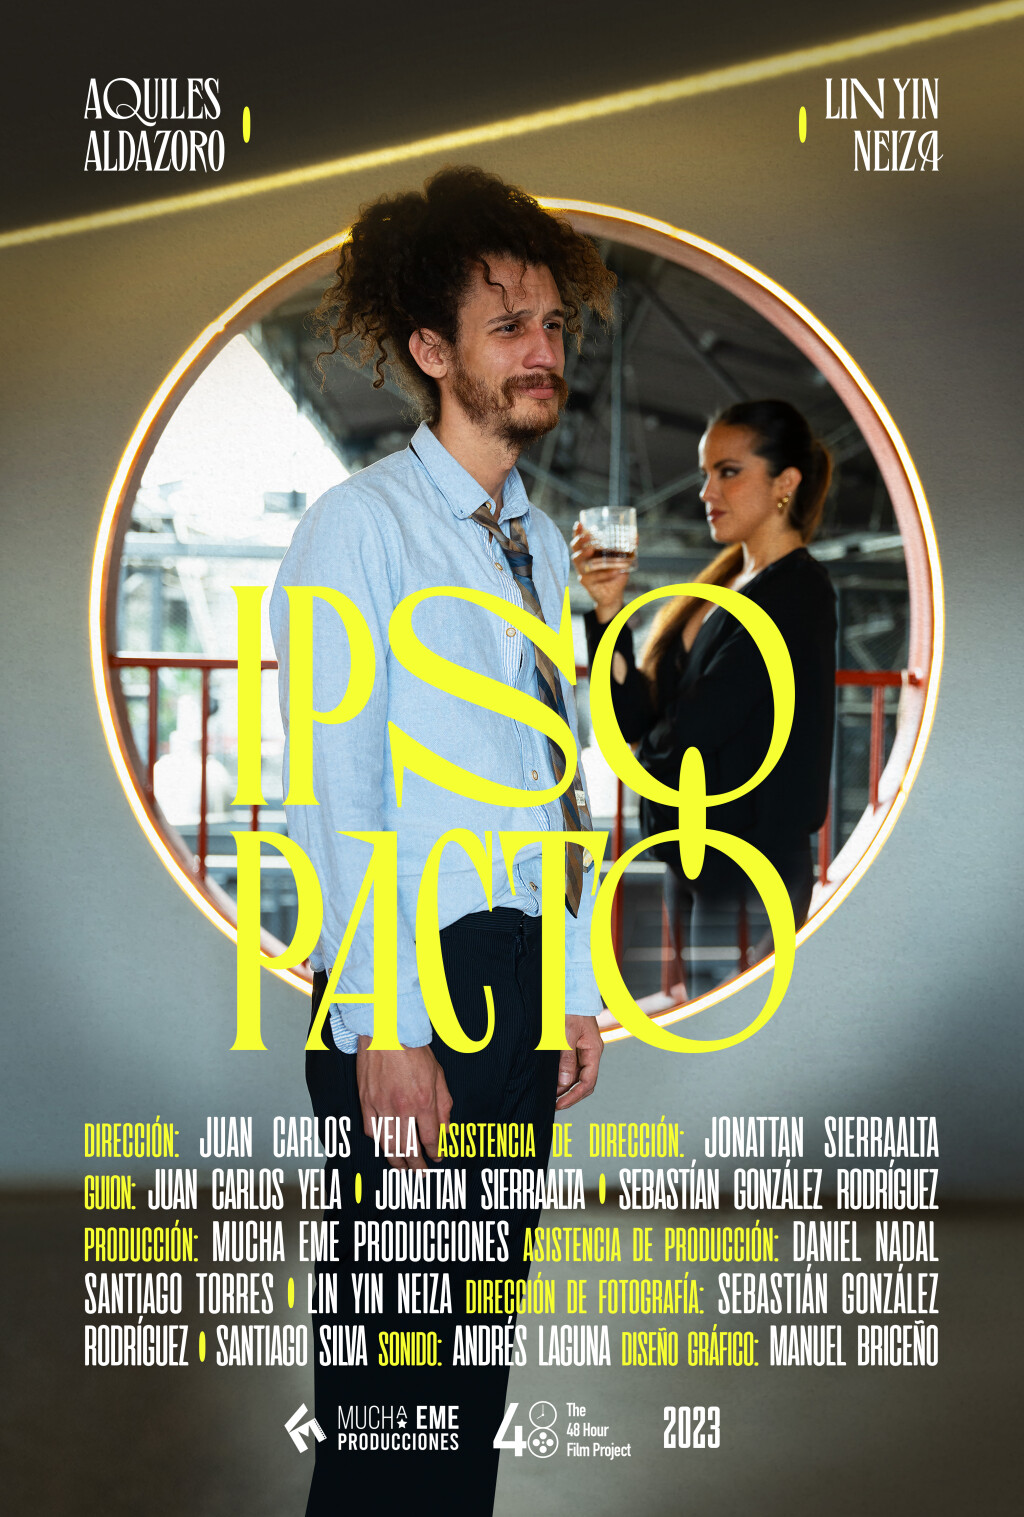 Filmposter for IPSO PACTO